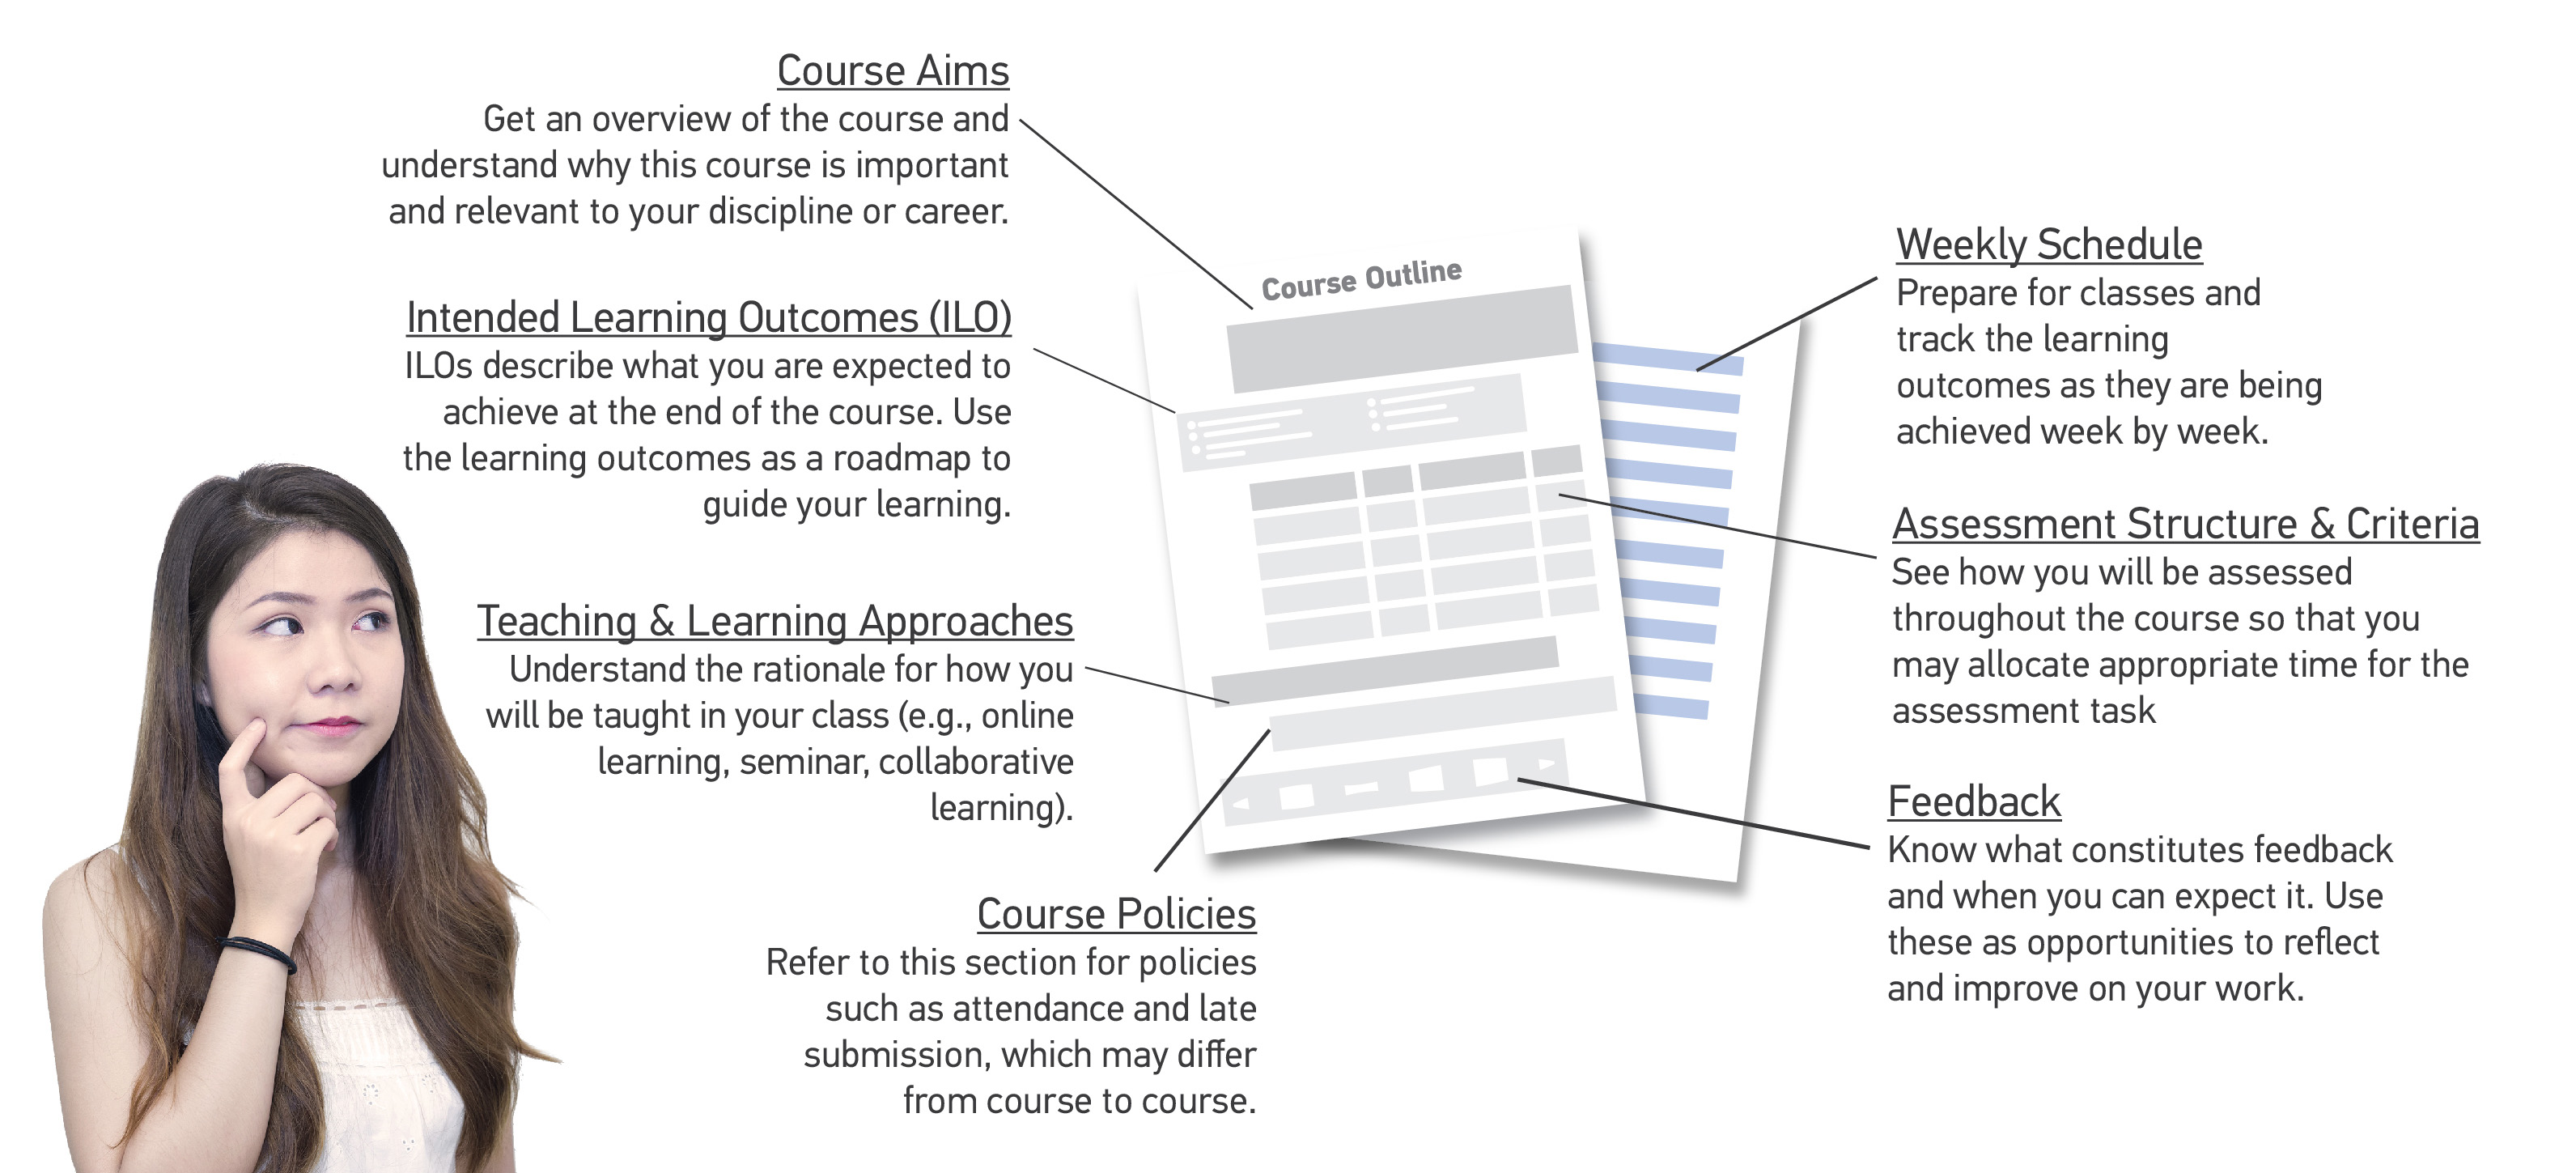 how the course outline benefits students